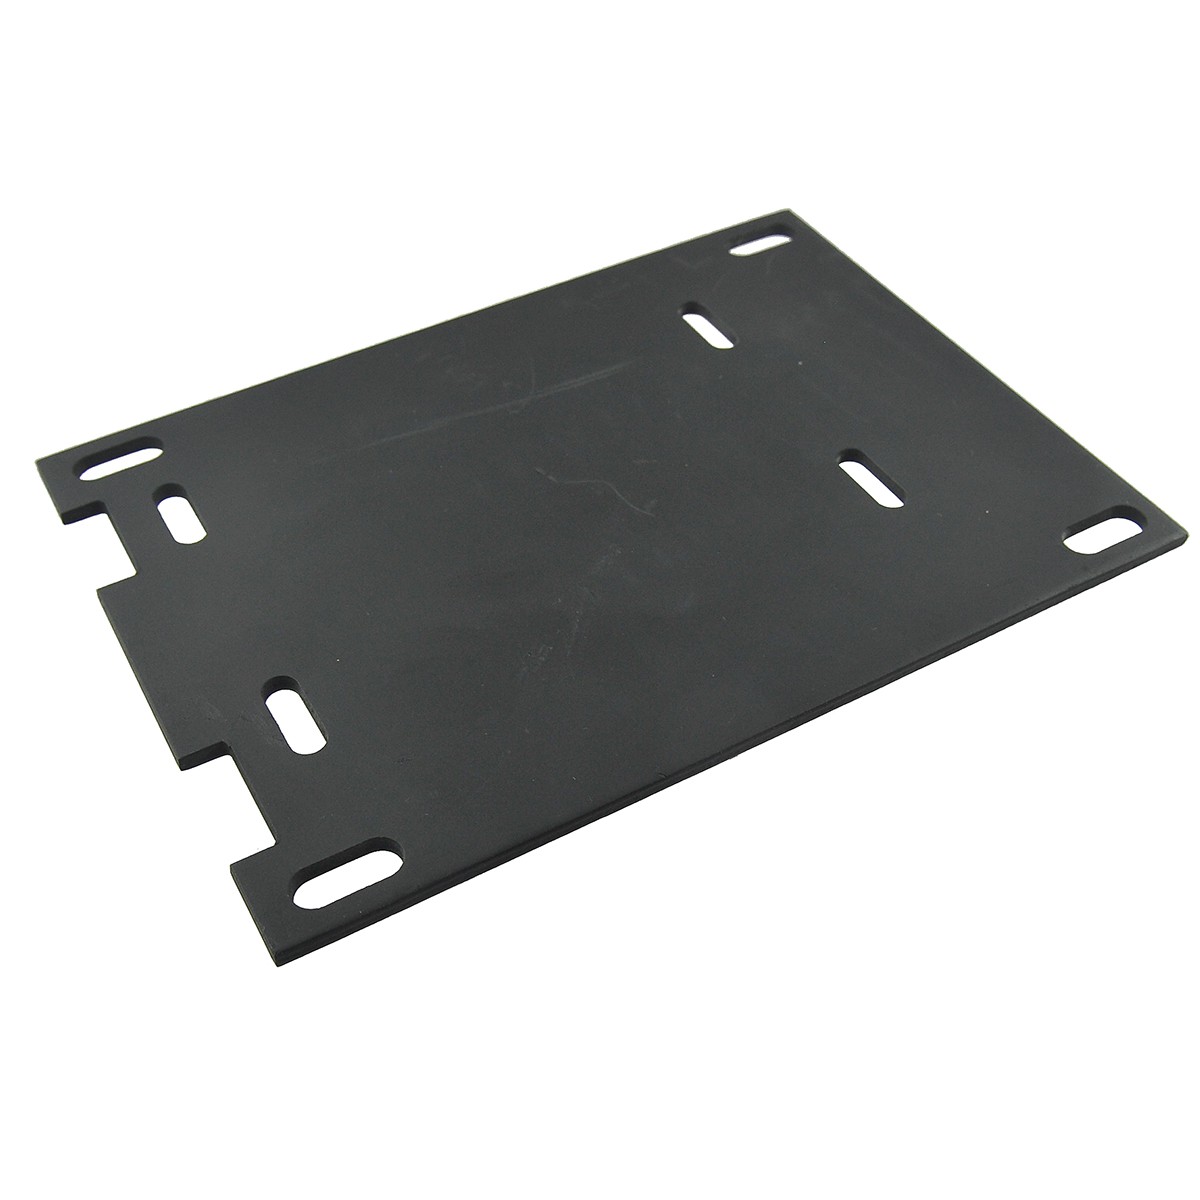 Chipper engine mounting plate / Cedrus RB02 / DR-GS-6.5HP 4FARMER